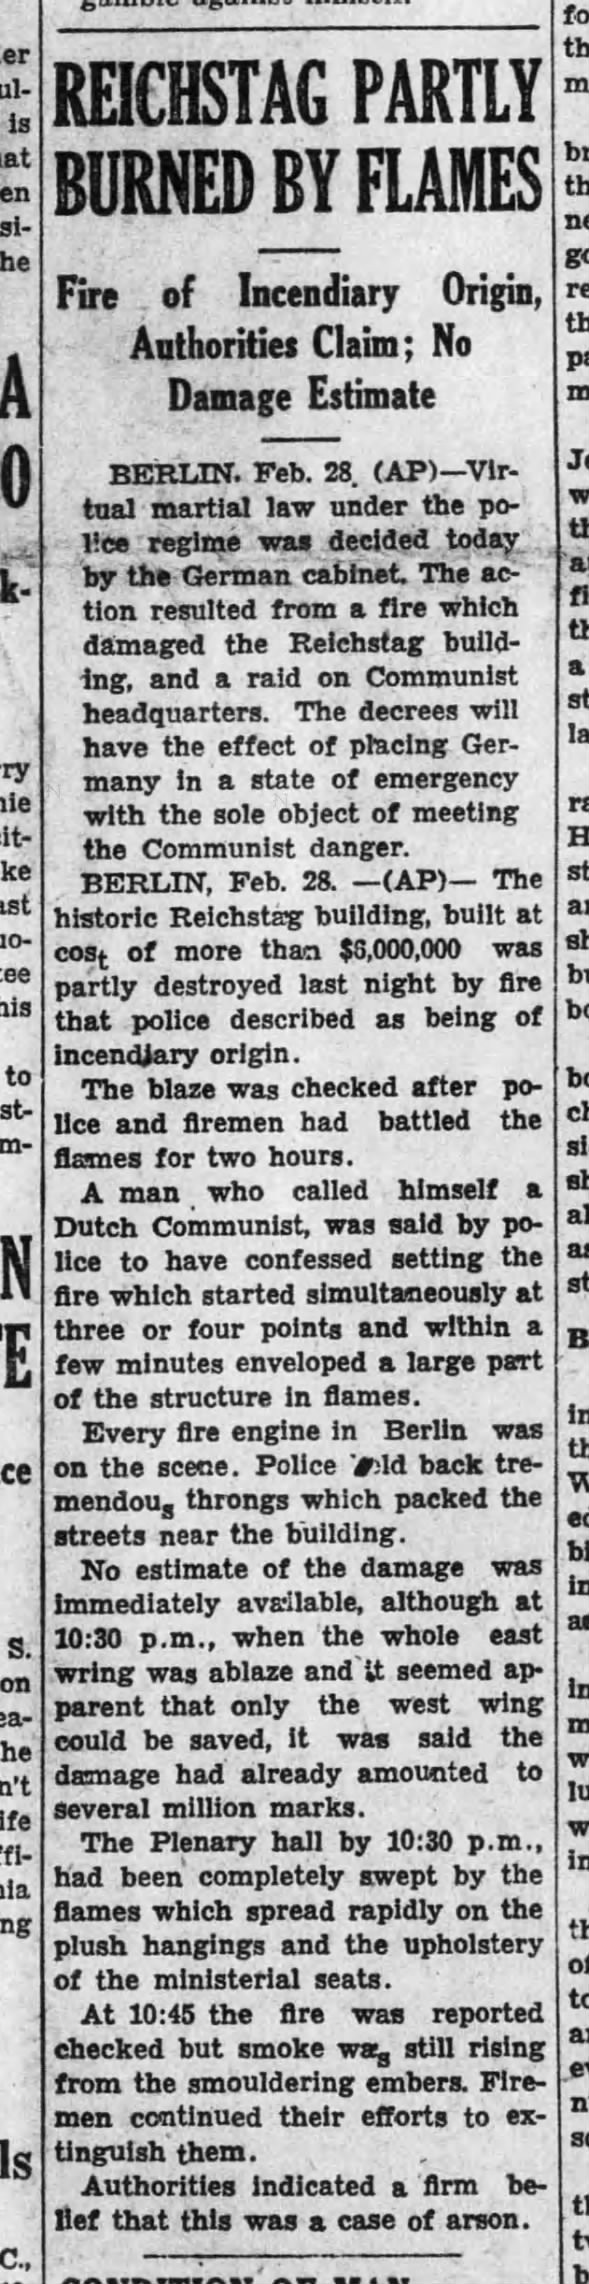 Reichstag Partly Burned By Flames